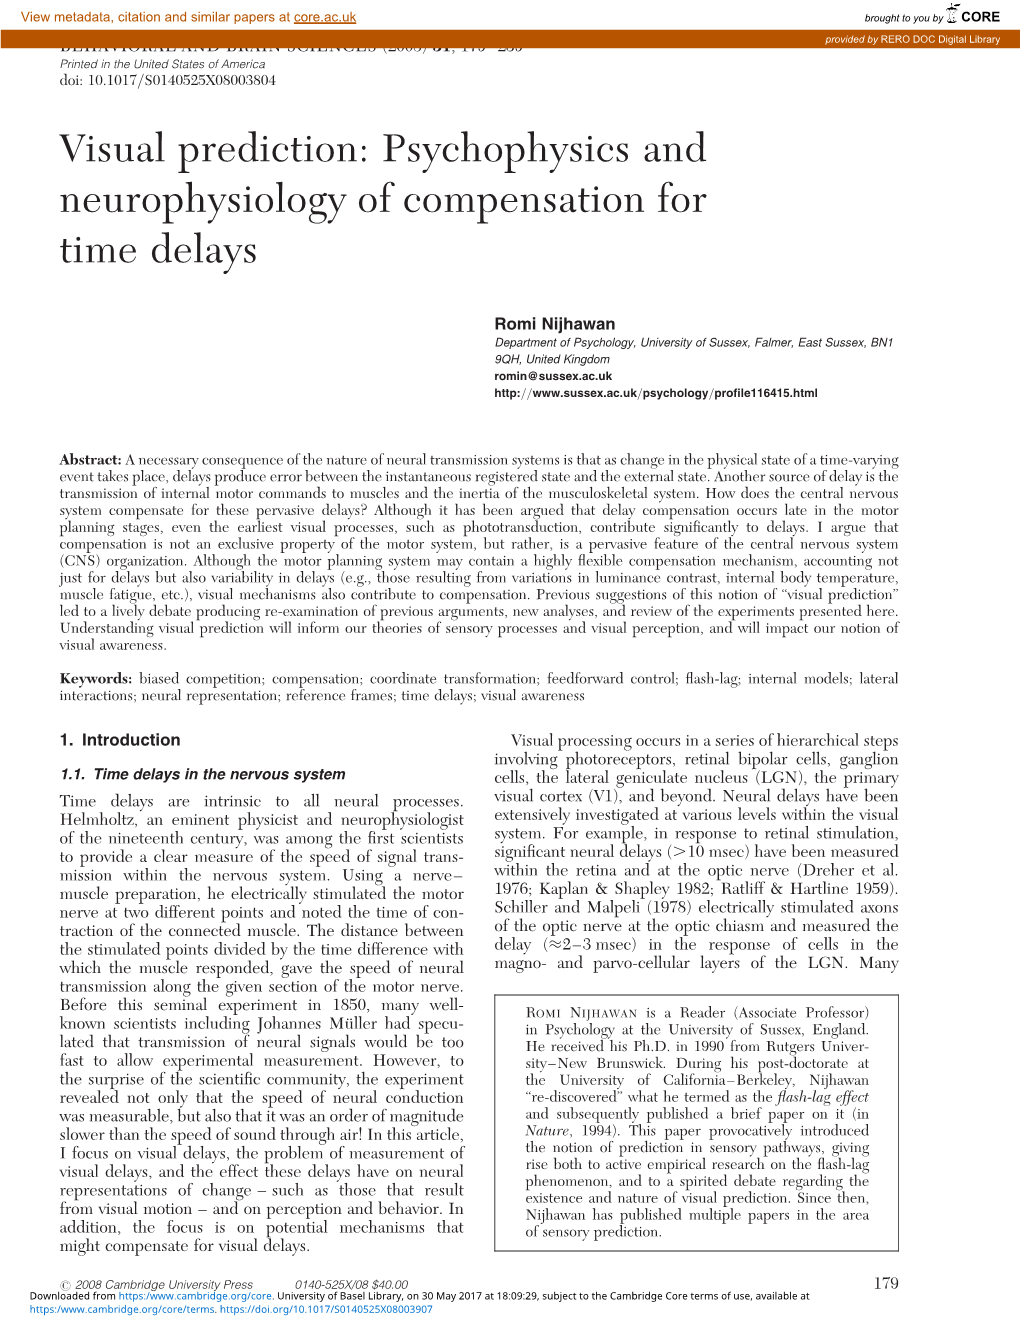 Psychophysics and Neurophysiology of Compensation for Time Delays